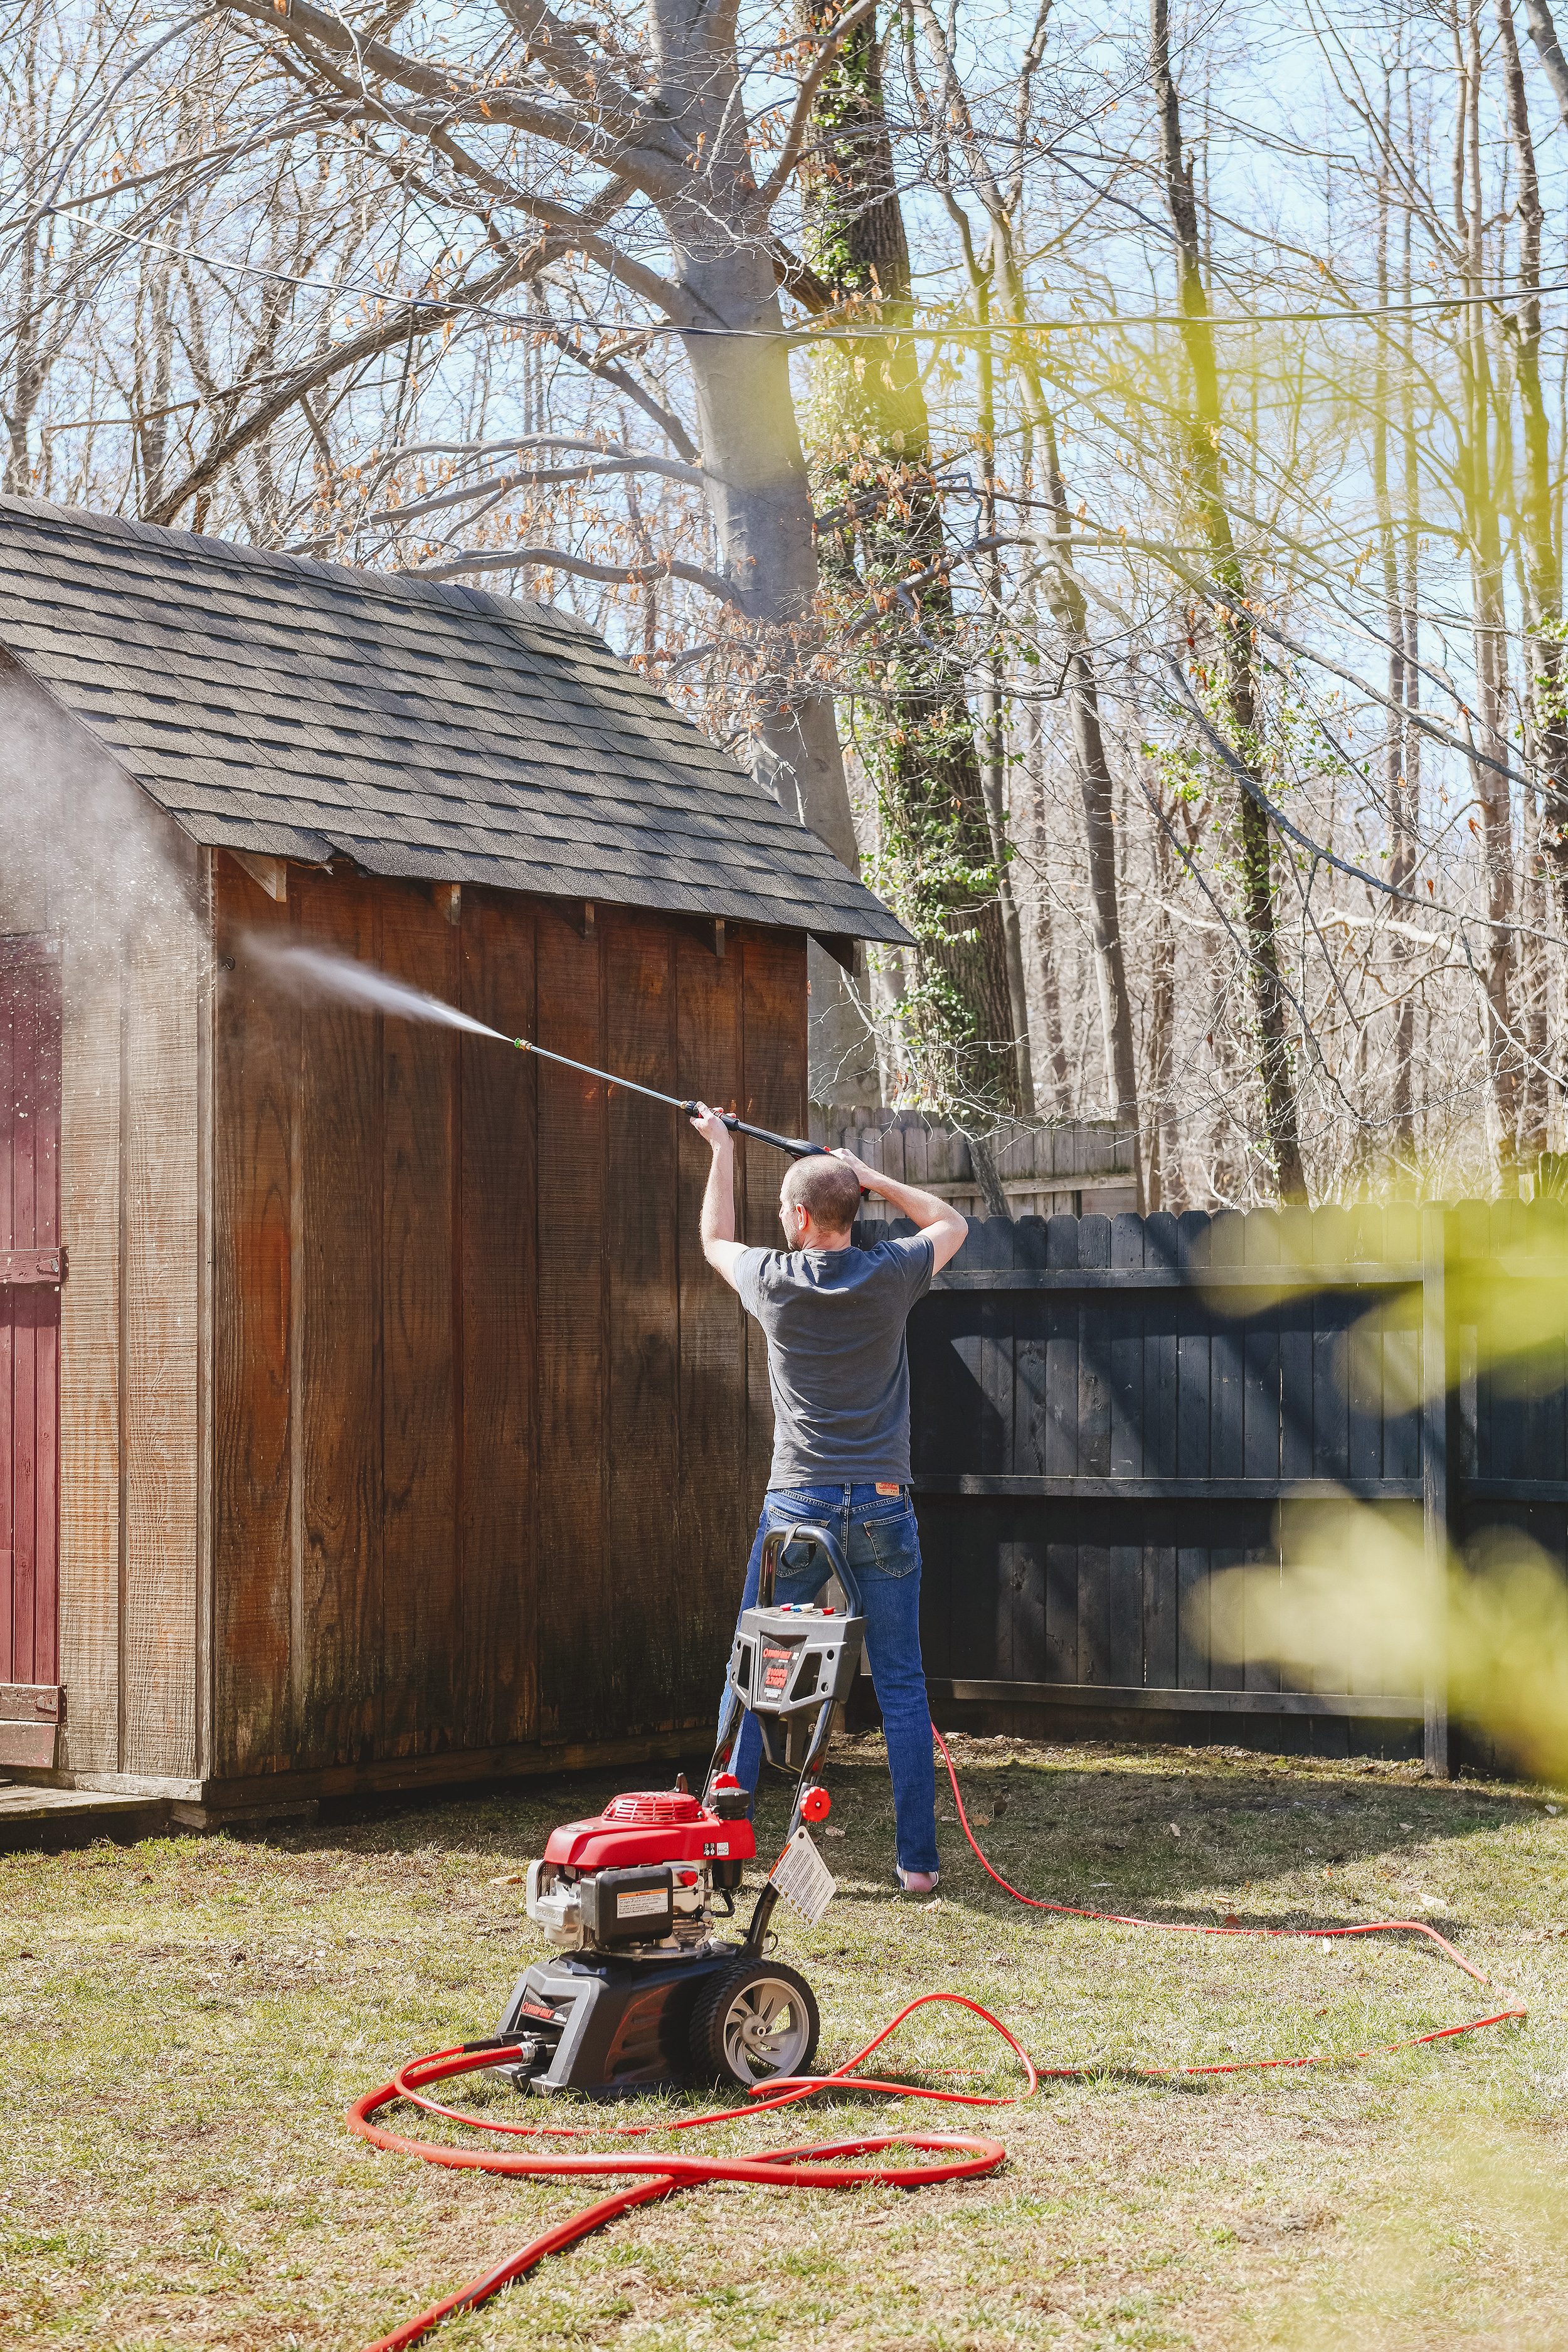 Scott pressure washes the exterior of the shed // via yellow brick home